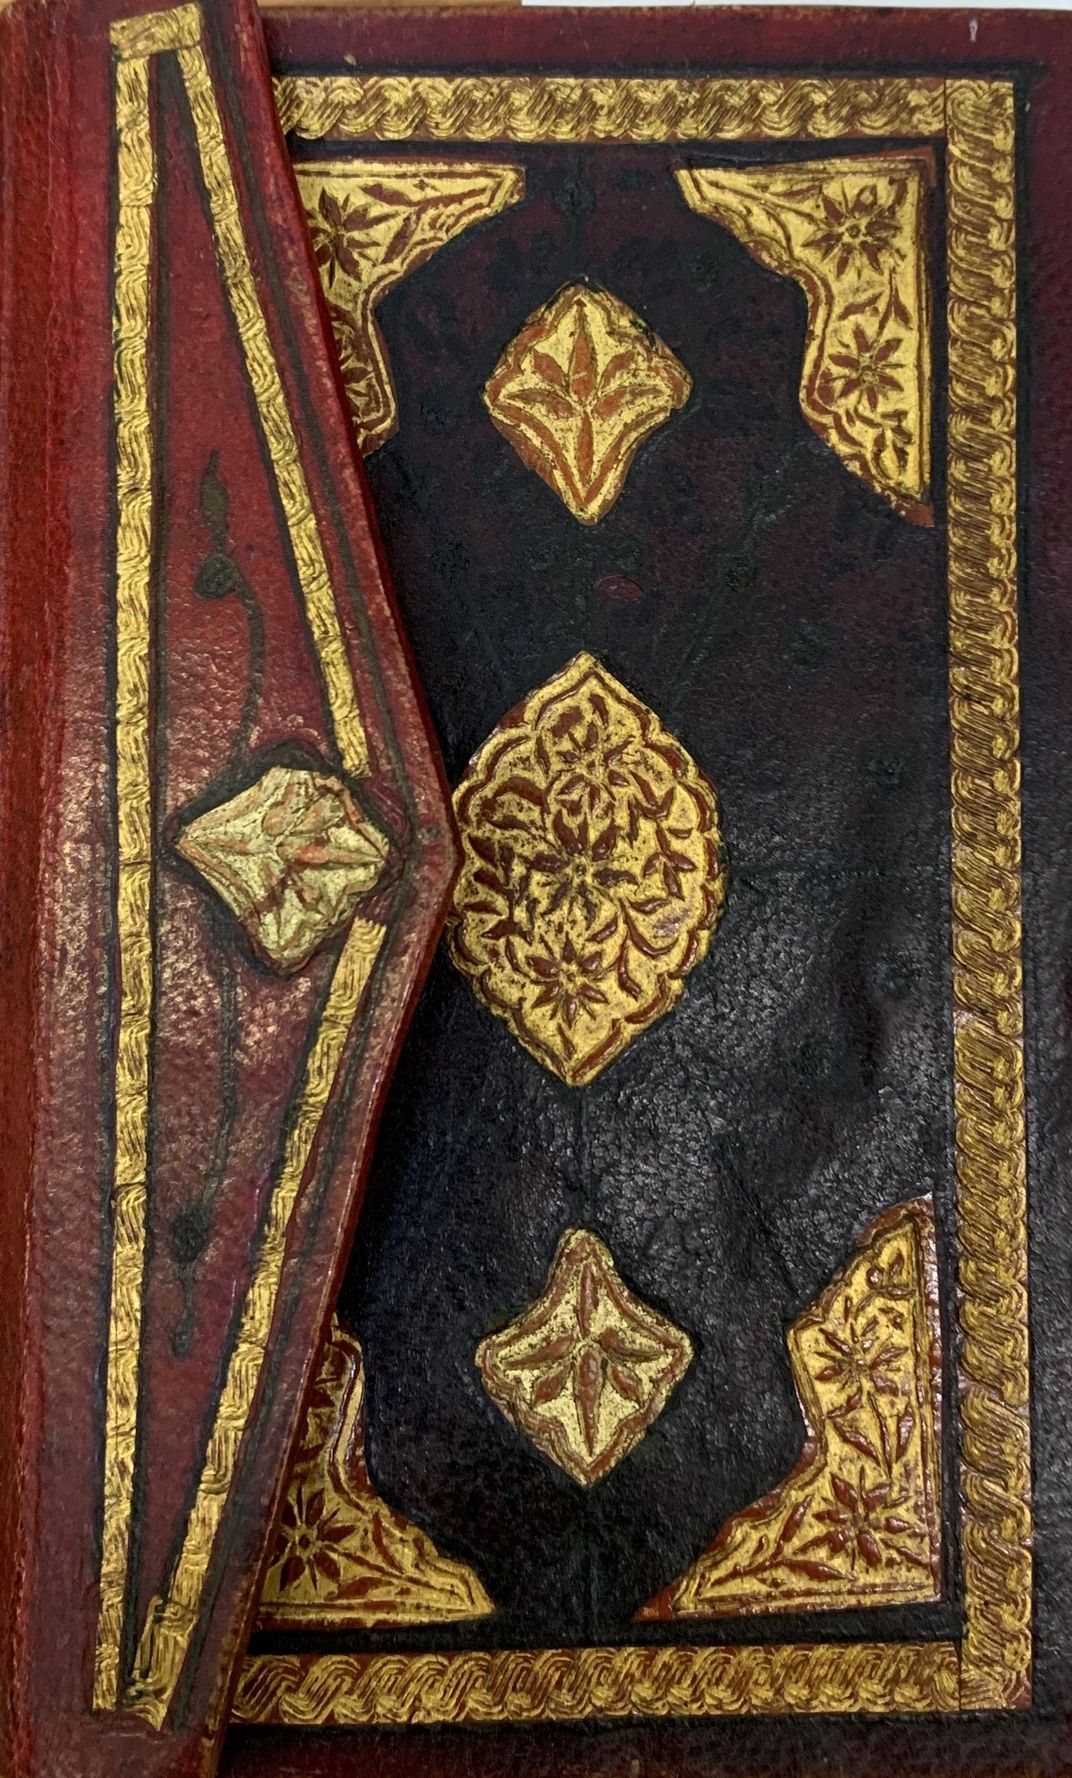 Ornate Qur ʾan with decorative leather binding.